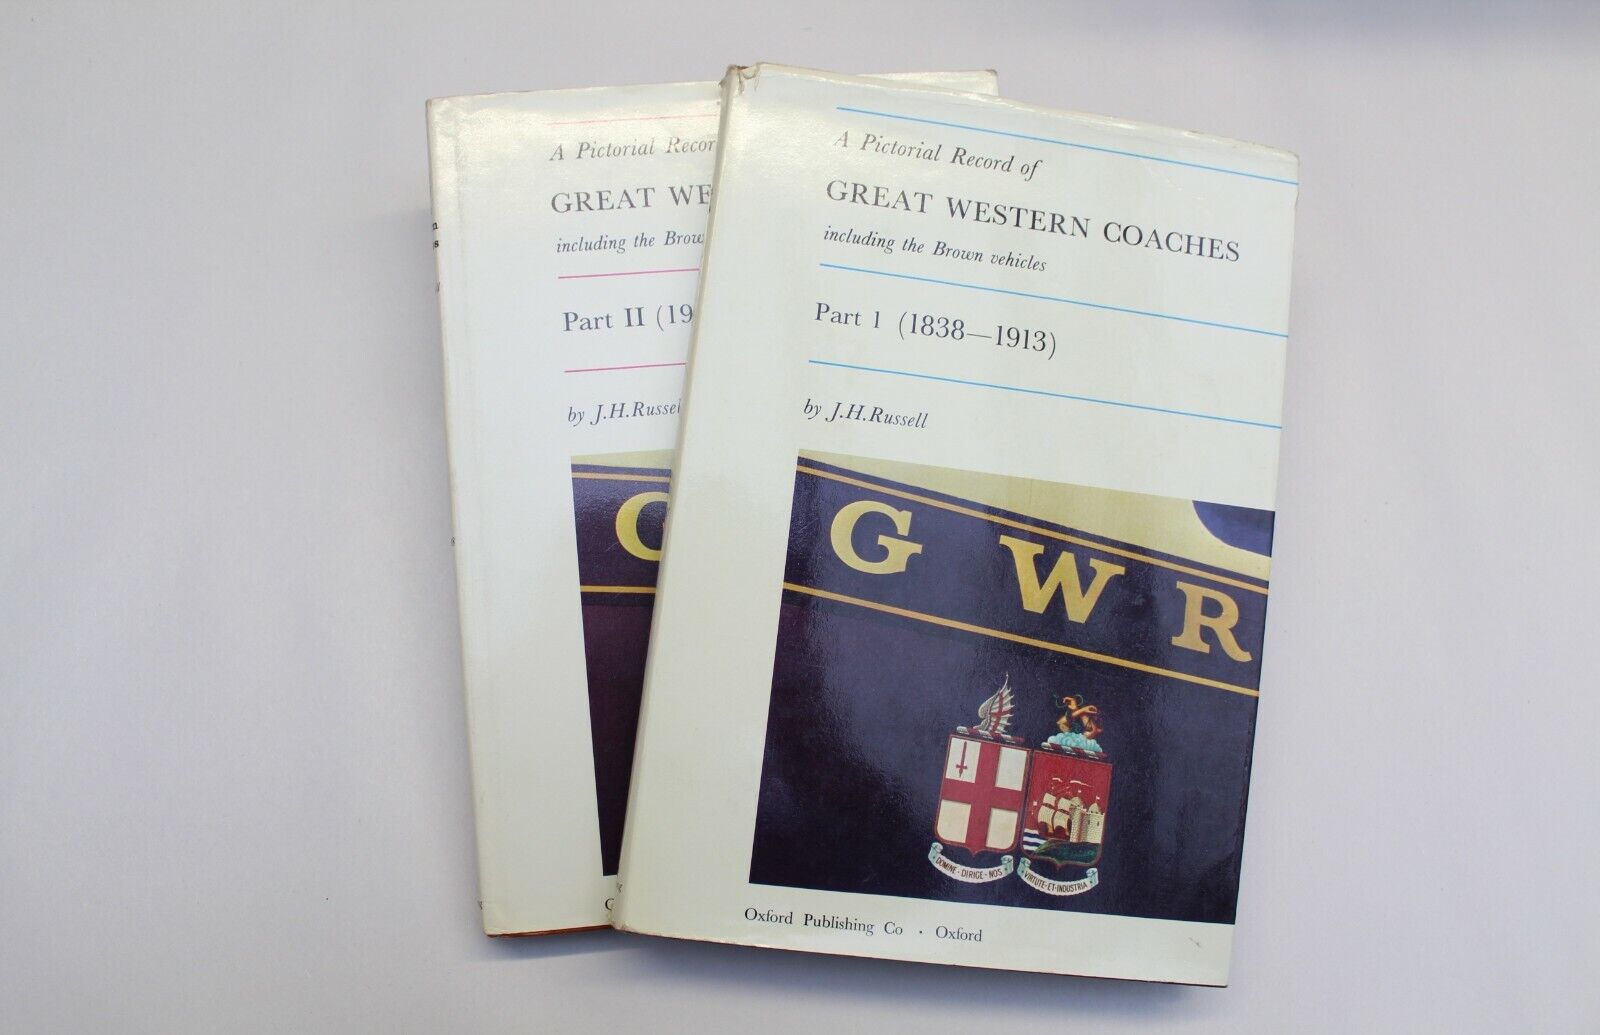 Pictorial Record GREAT WESTERN COACHES Part One 1838-1913 Part Two 1903-1948 A